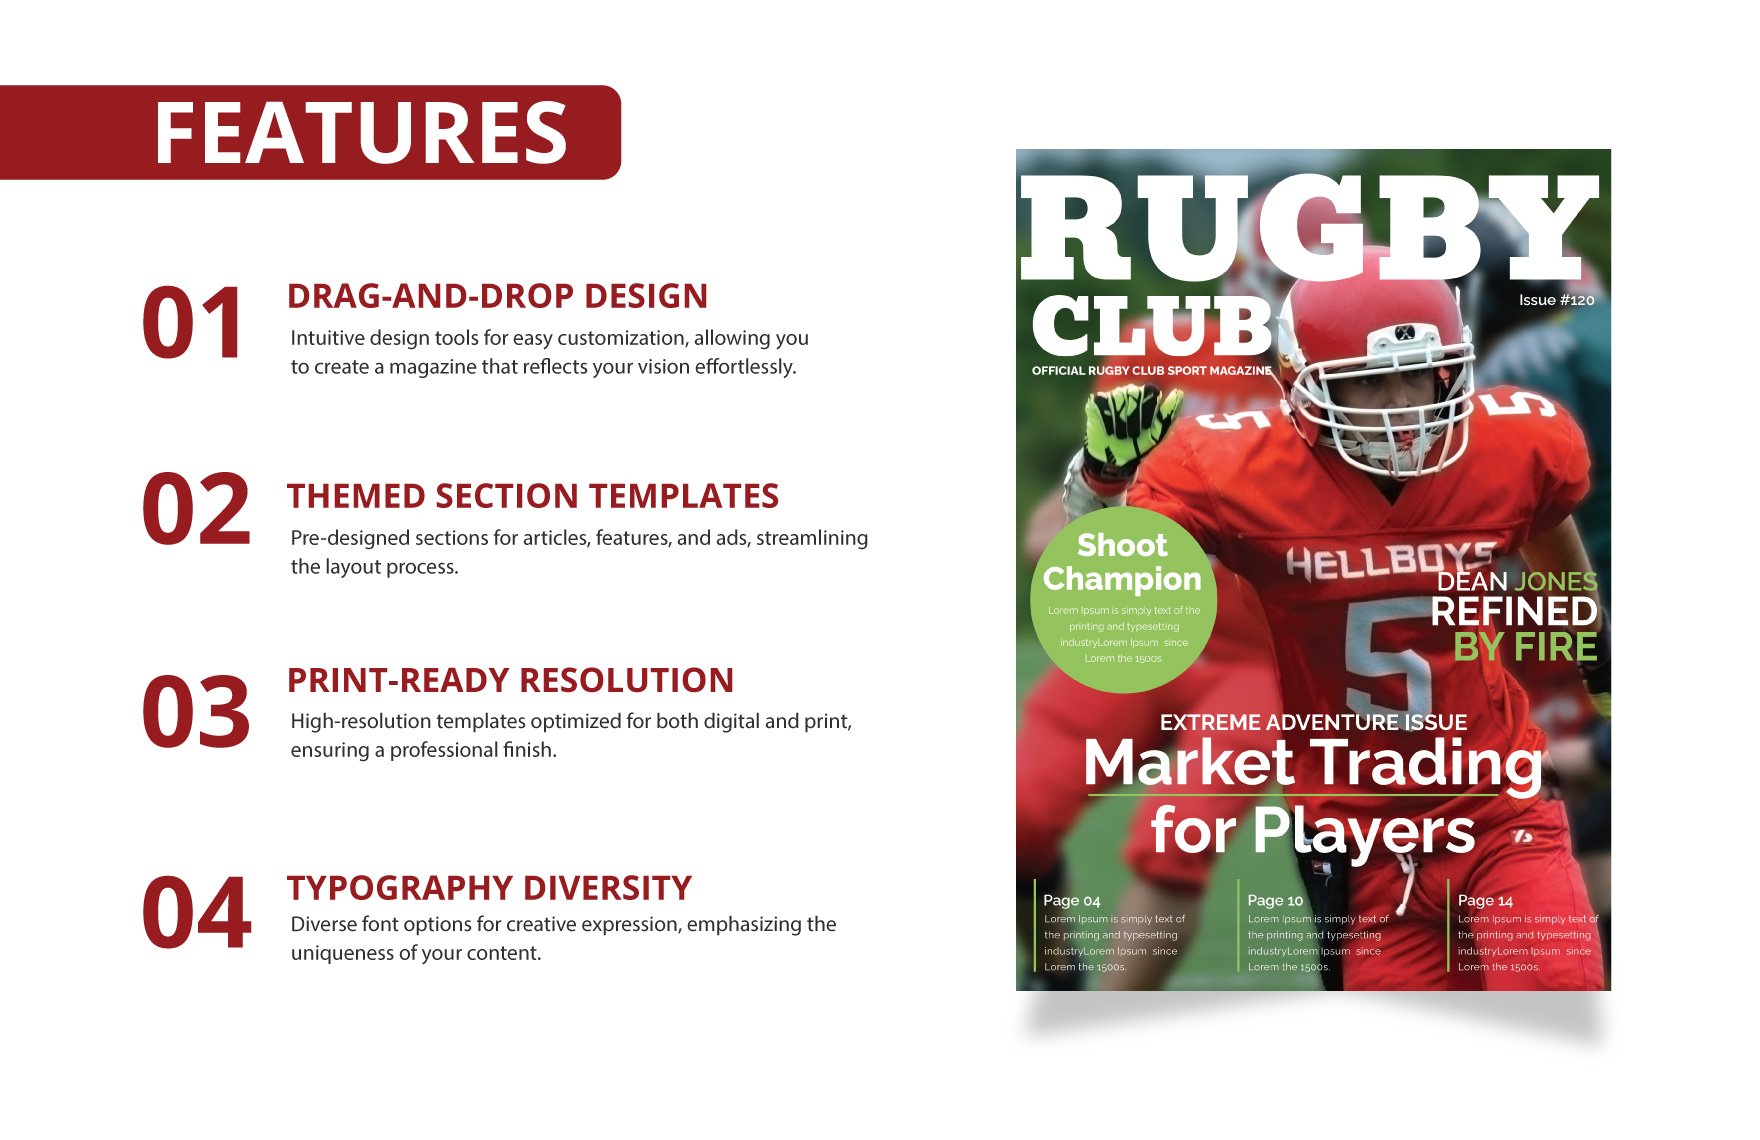 Rugby Magazine Cover Template